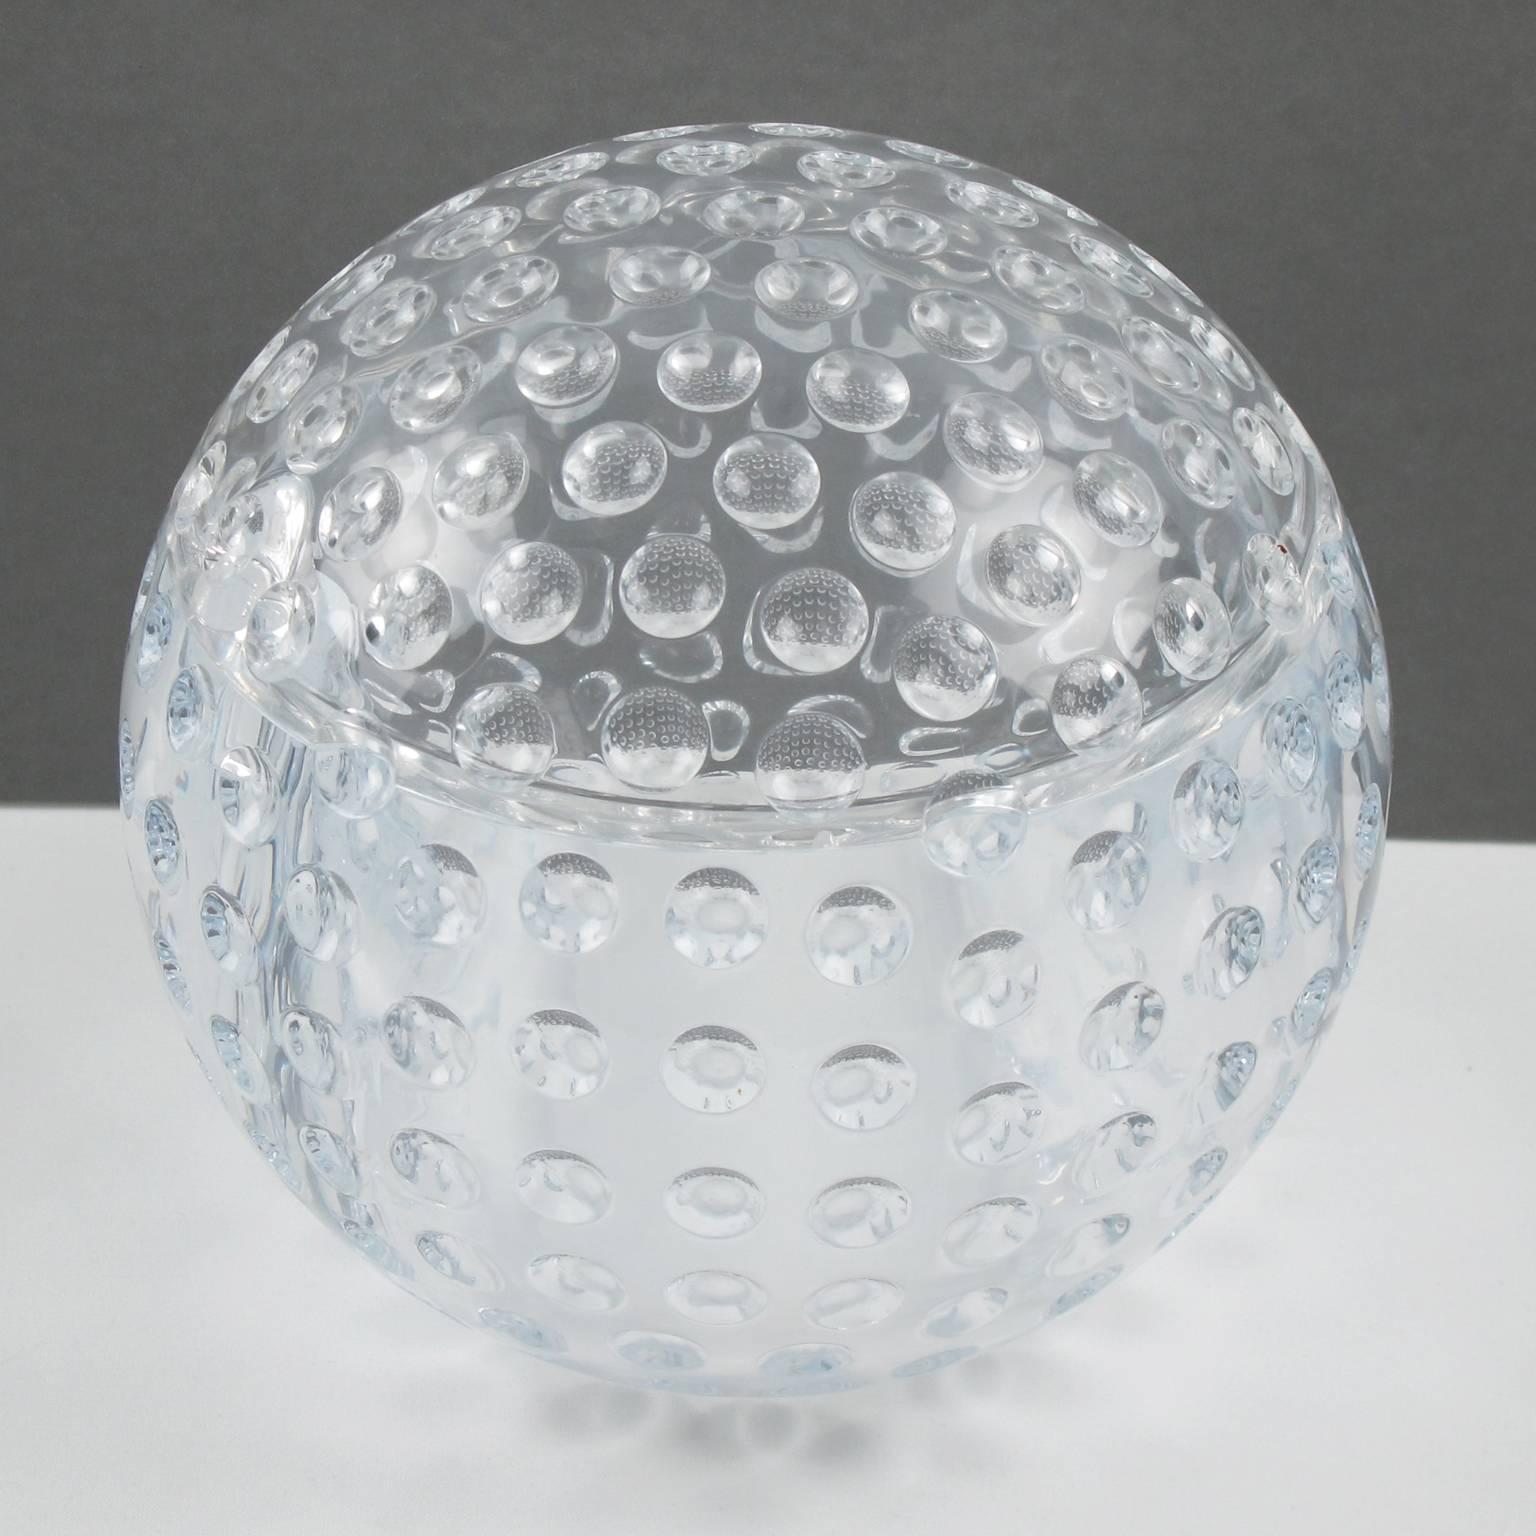 Stunning modernist Lucite centerpiece or ice bucket with swivel top. Sculptural crystal clear Lucite featuring a gigantic golf ball with bubbles carving all around. The top swivels to reveal a large space perfect for ice or for candy. Awesome